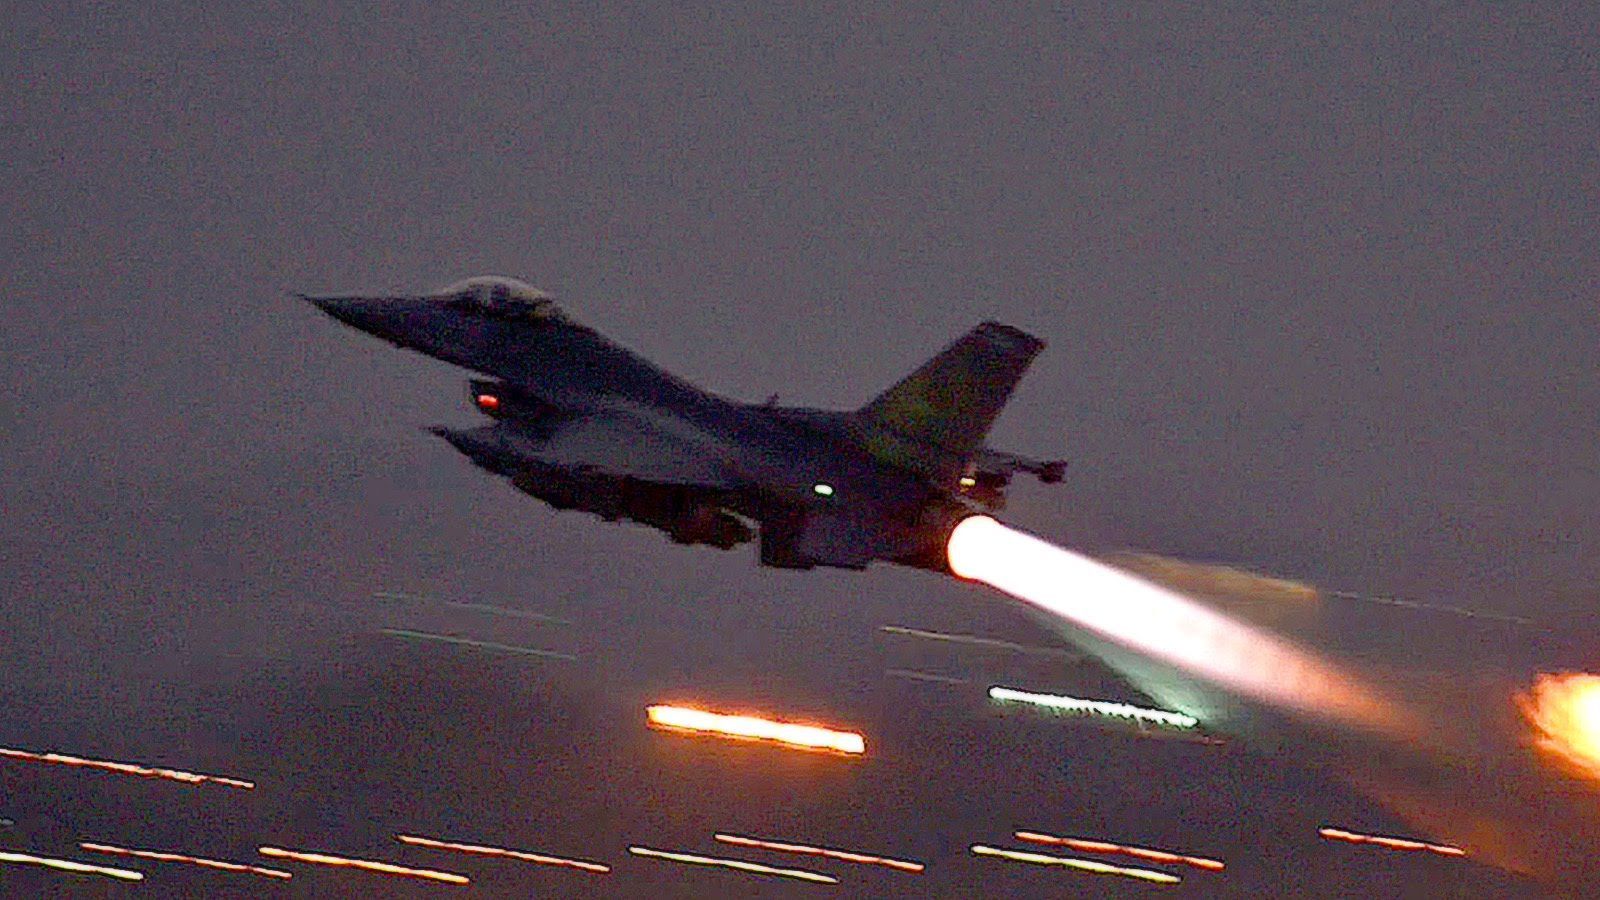 F 16 Night Afterburner Takeoffs From Incirlik Air Base. Fighter Jets, Fighter Aircraft, Fighter